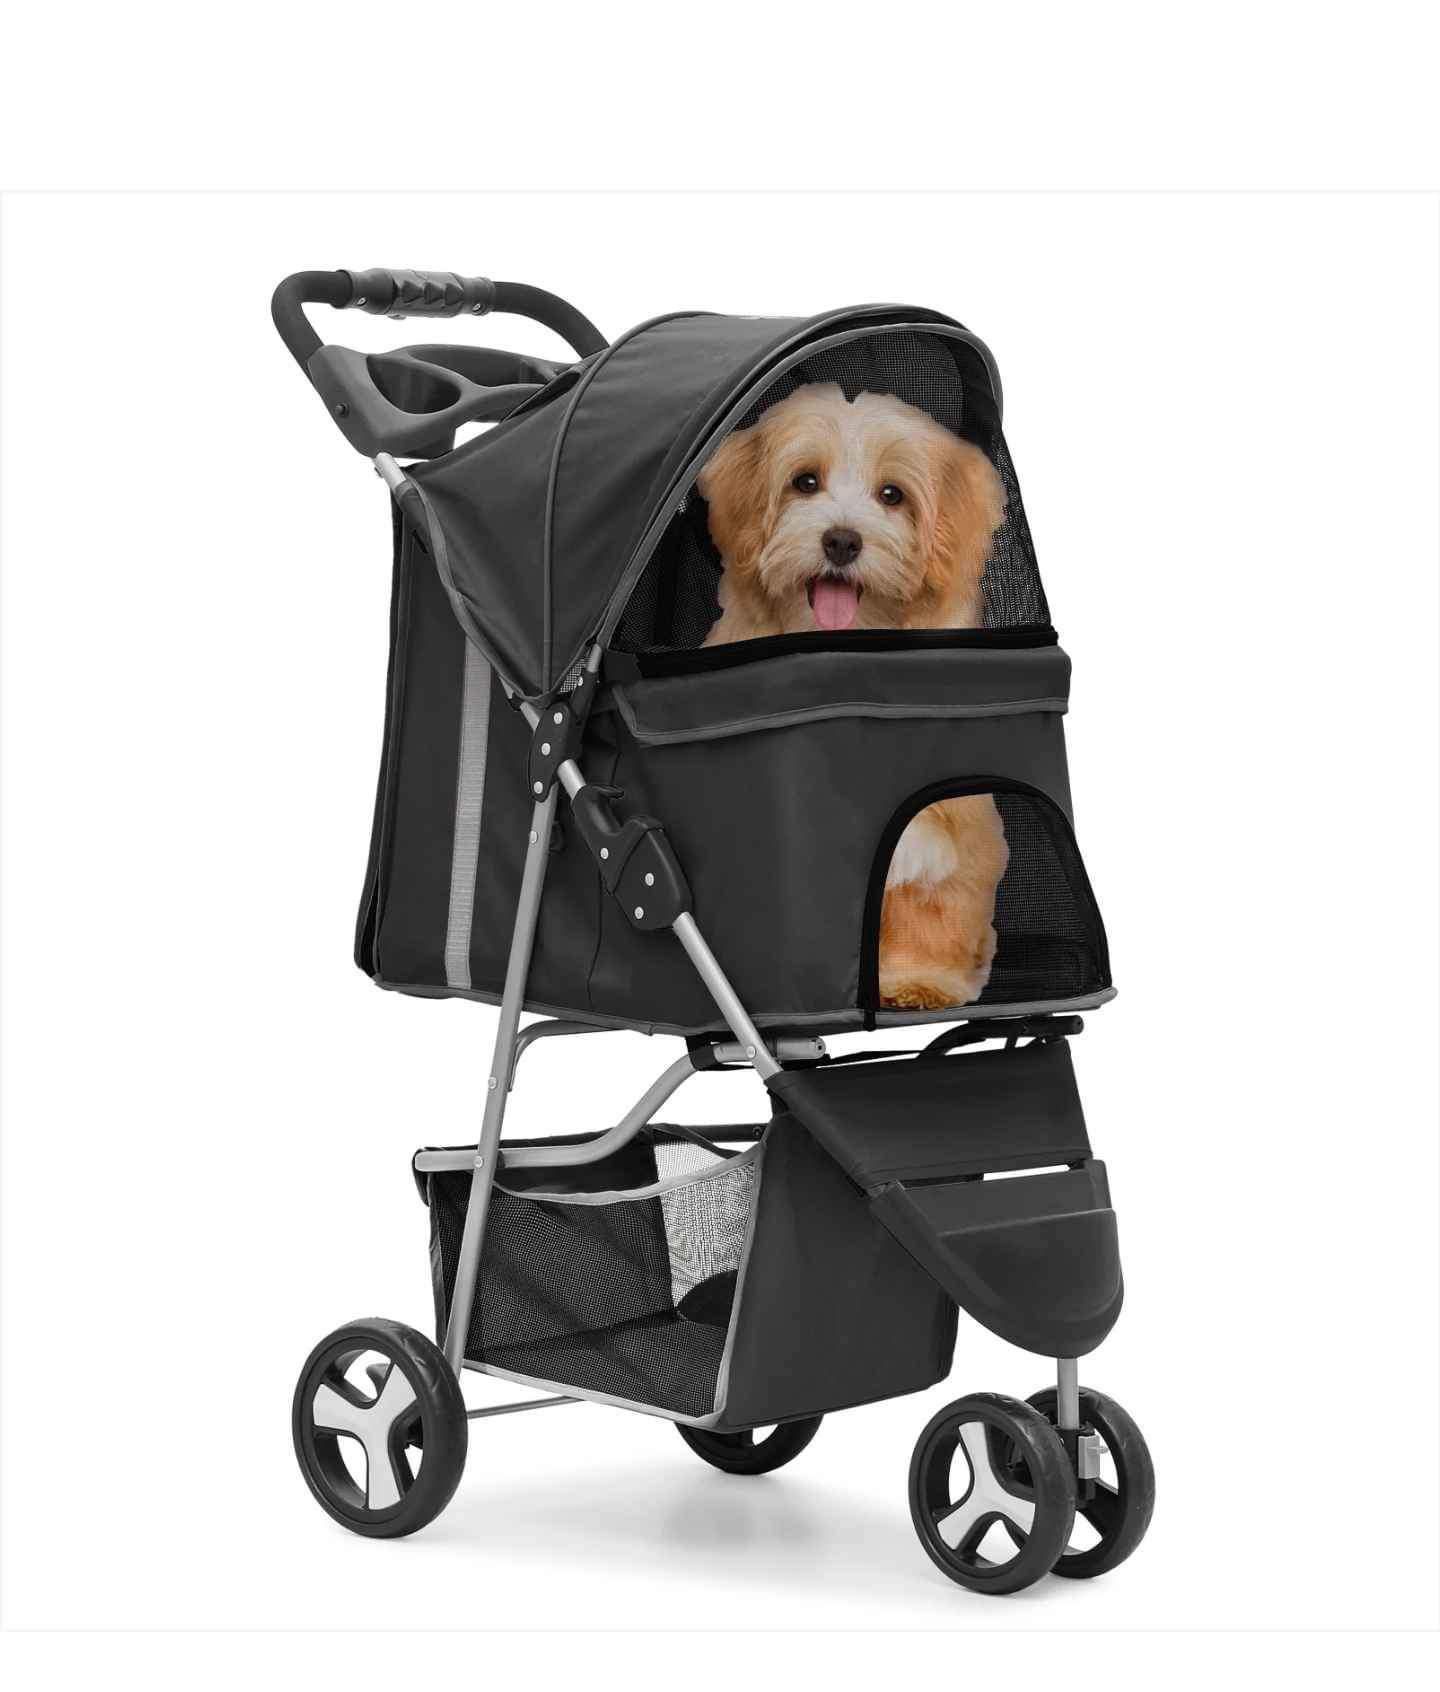 PET STROLLER FOLDABLE UP TO 40 LBS FOR DOGS AND CATS. BRAND NEW. ASSEMBLED